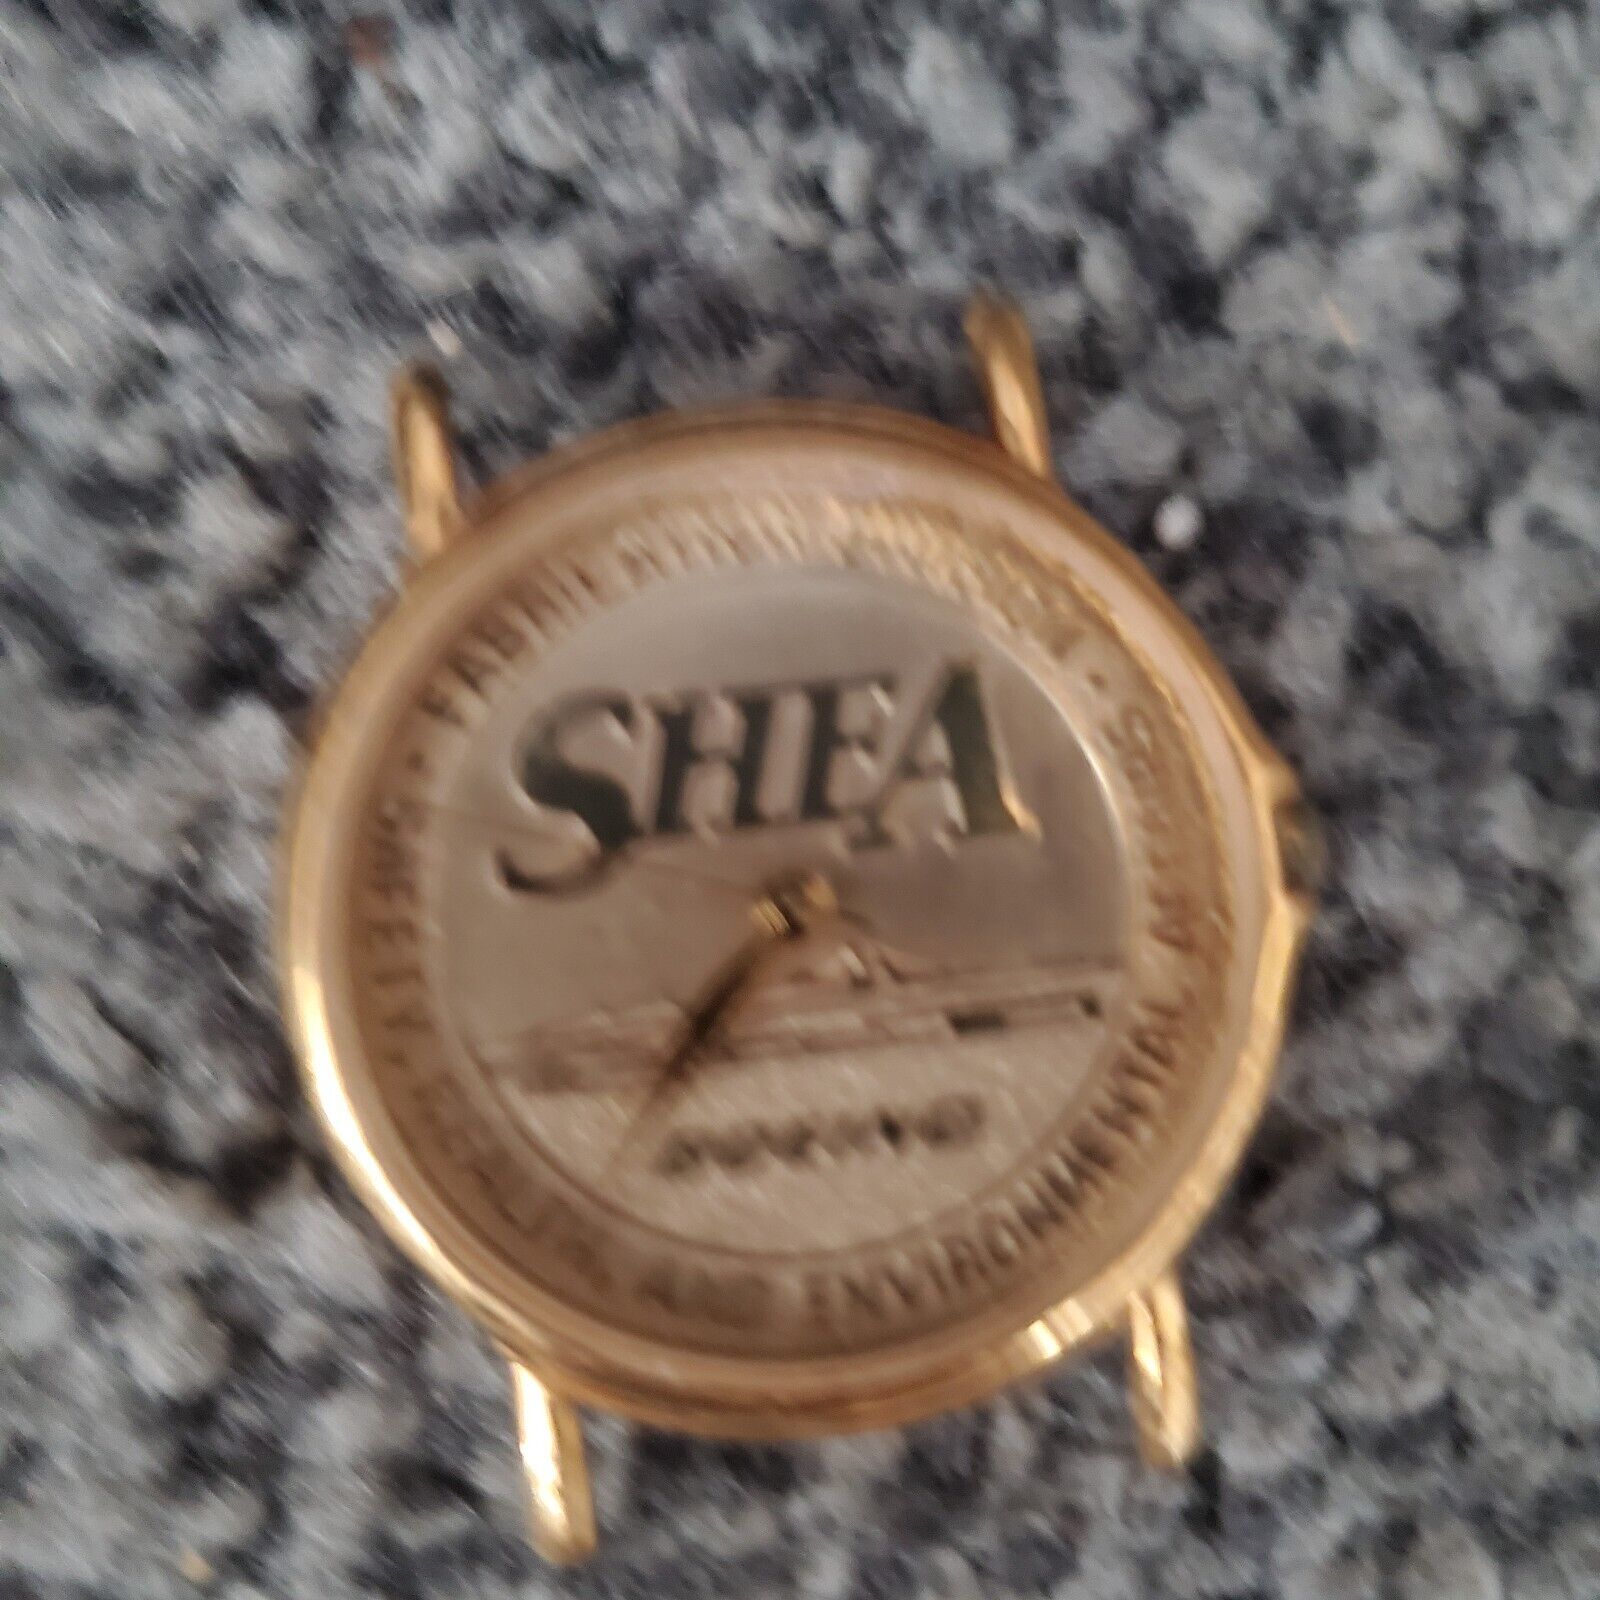 NOS SHEA Boeing Advertising Watch - Safety Health Environmental Affairs